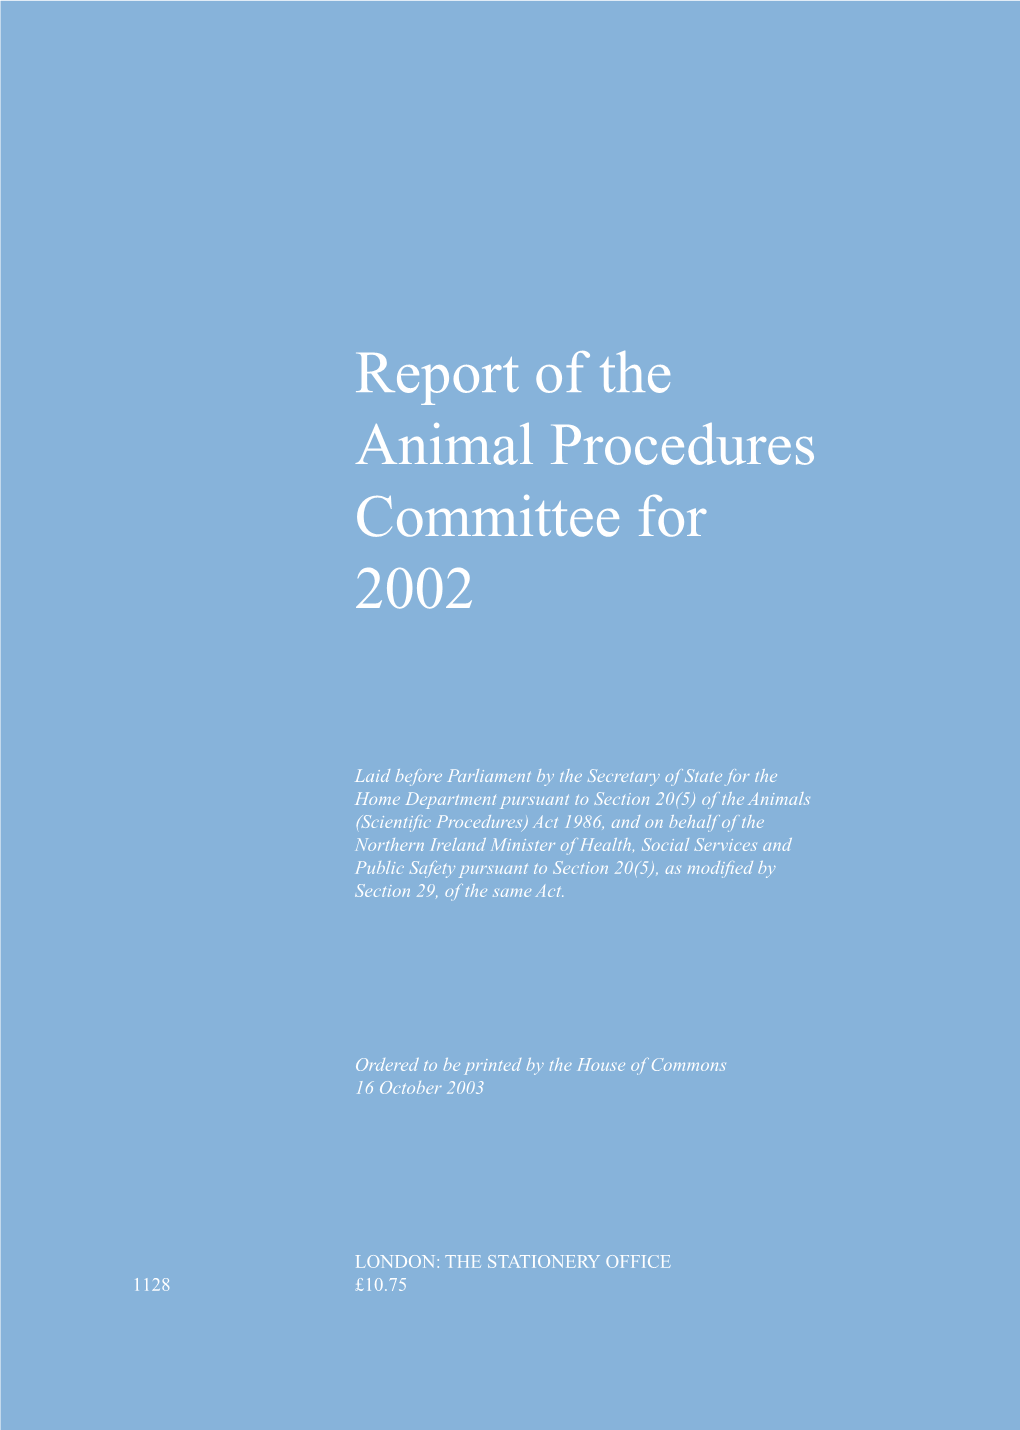 Report of the Animal Procedures Committee for 2002